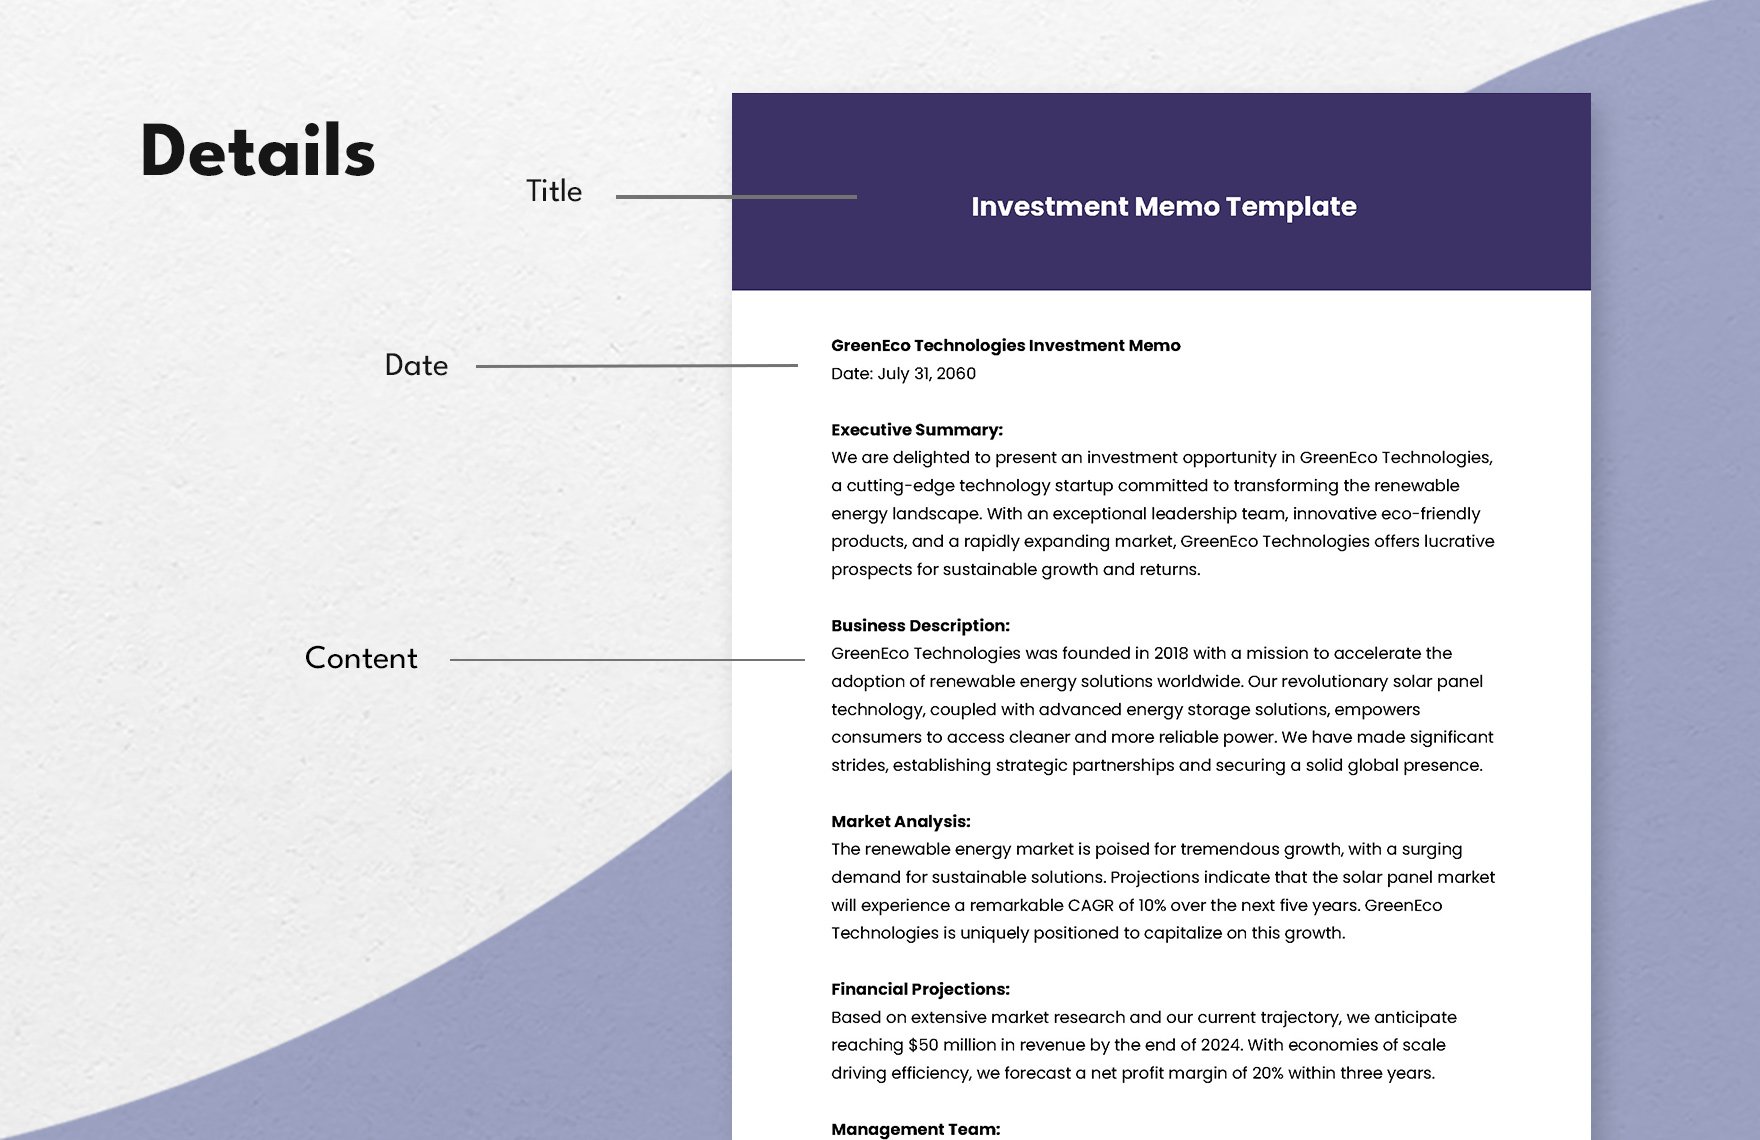 Investment Memo Template